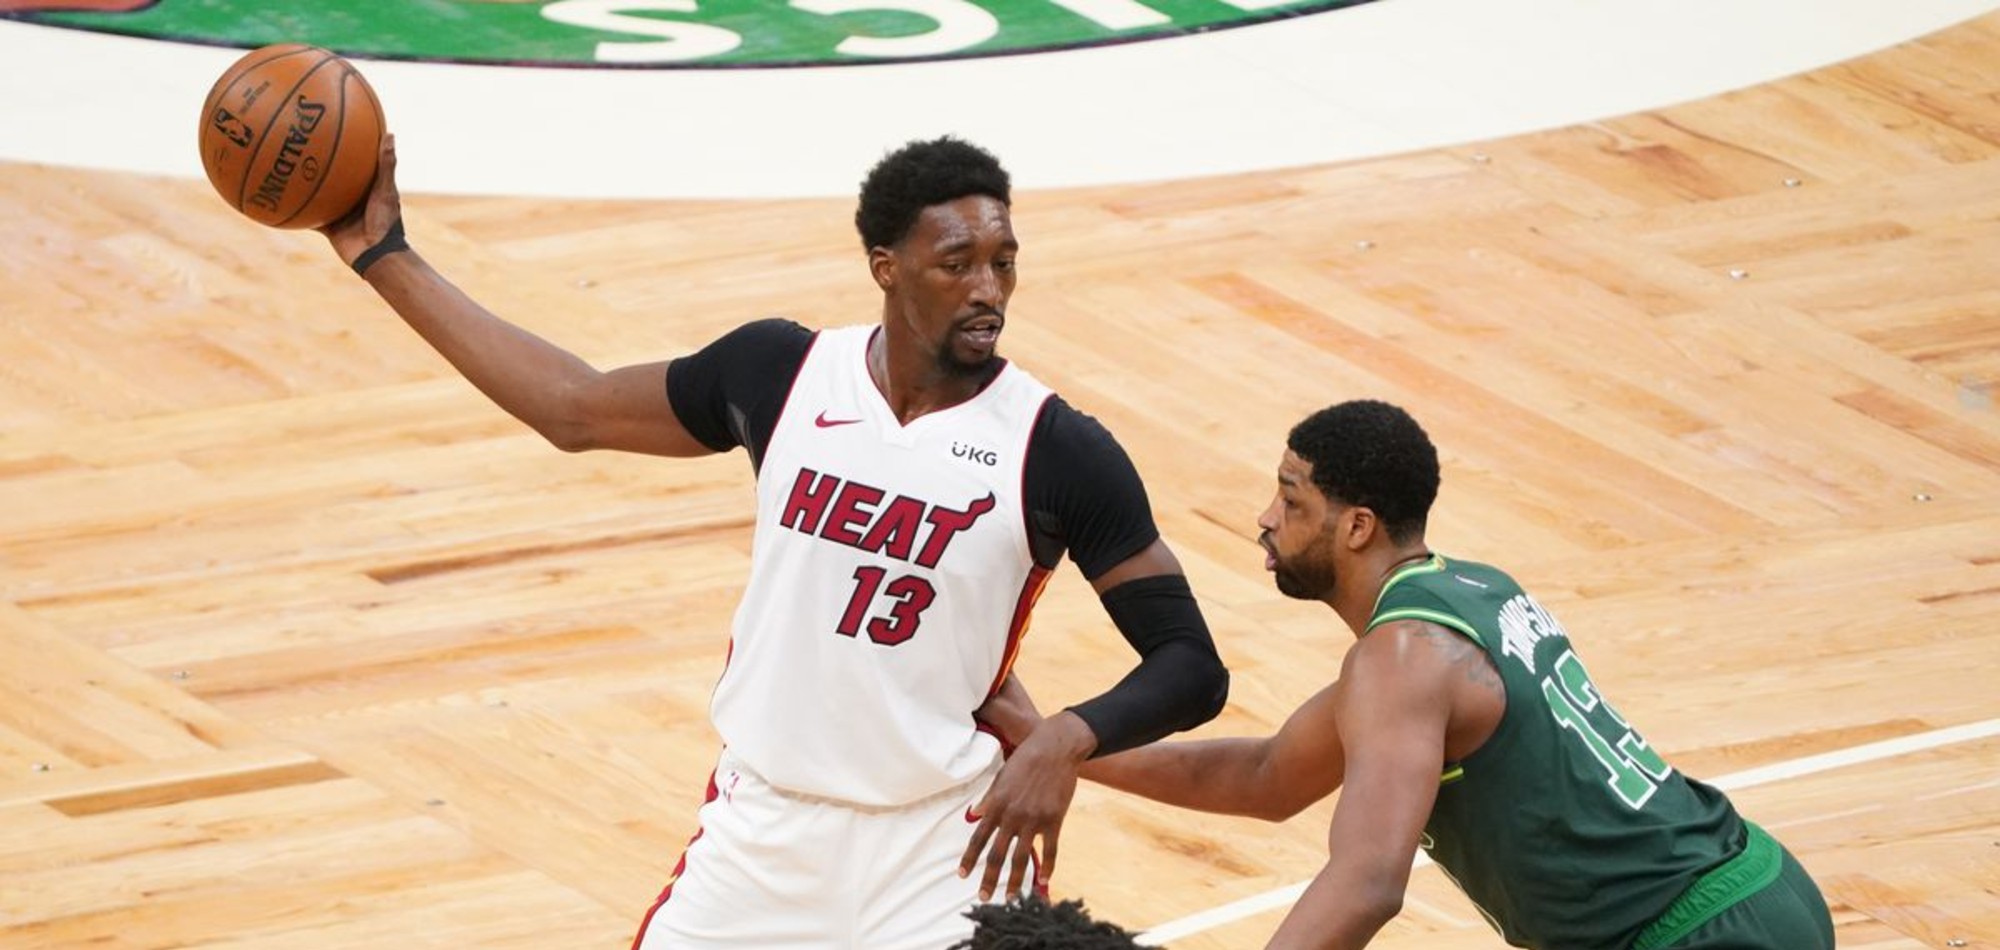 Heat clinch NBA Playoff berth with win over Boston, as the Lakers sink a clutch three for the win in OT